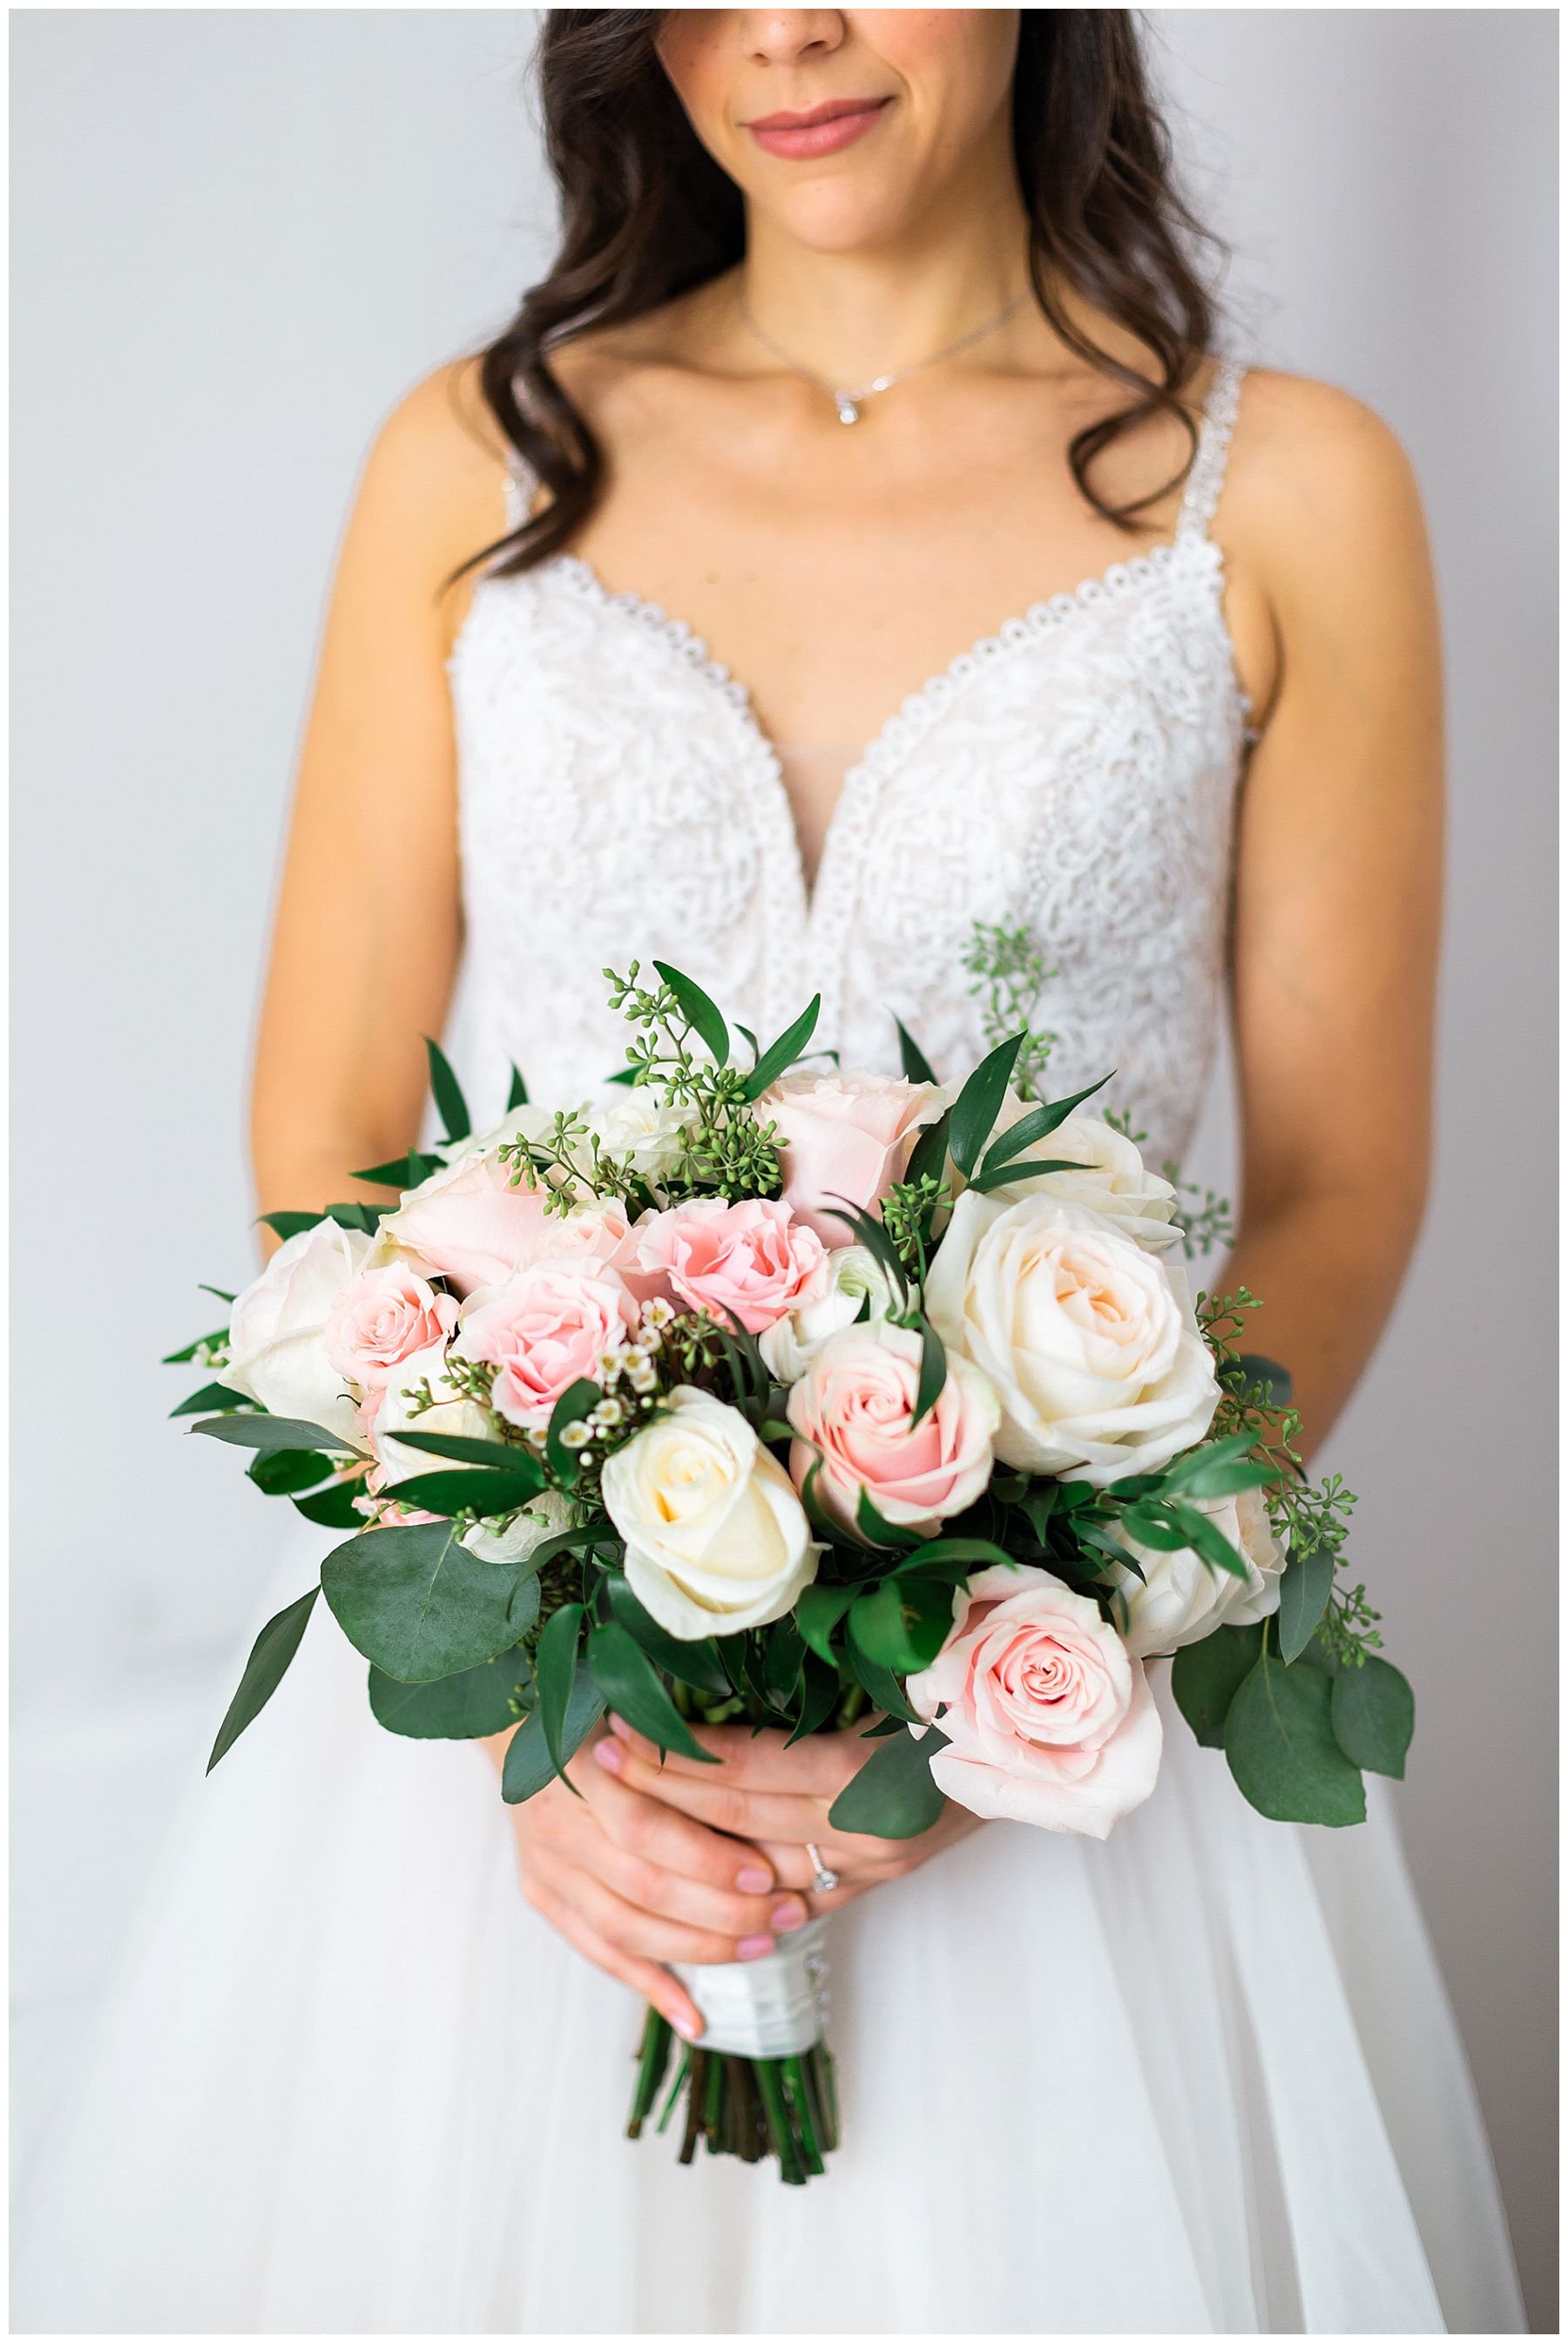 Italian bride holding her bouquet of roses